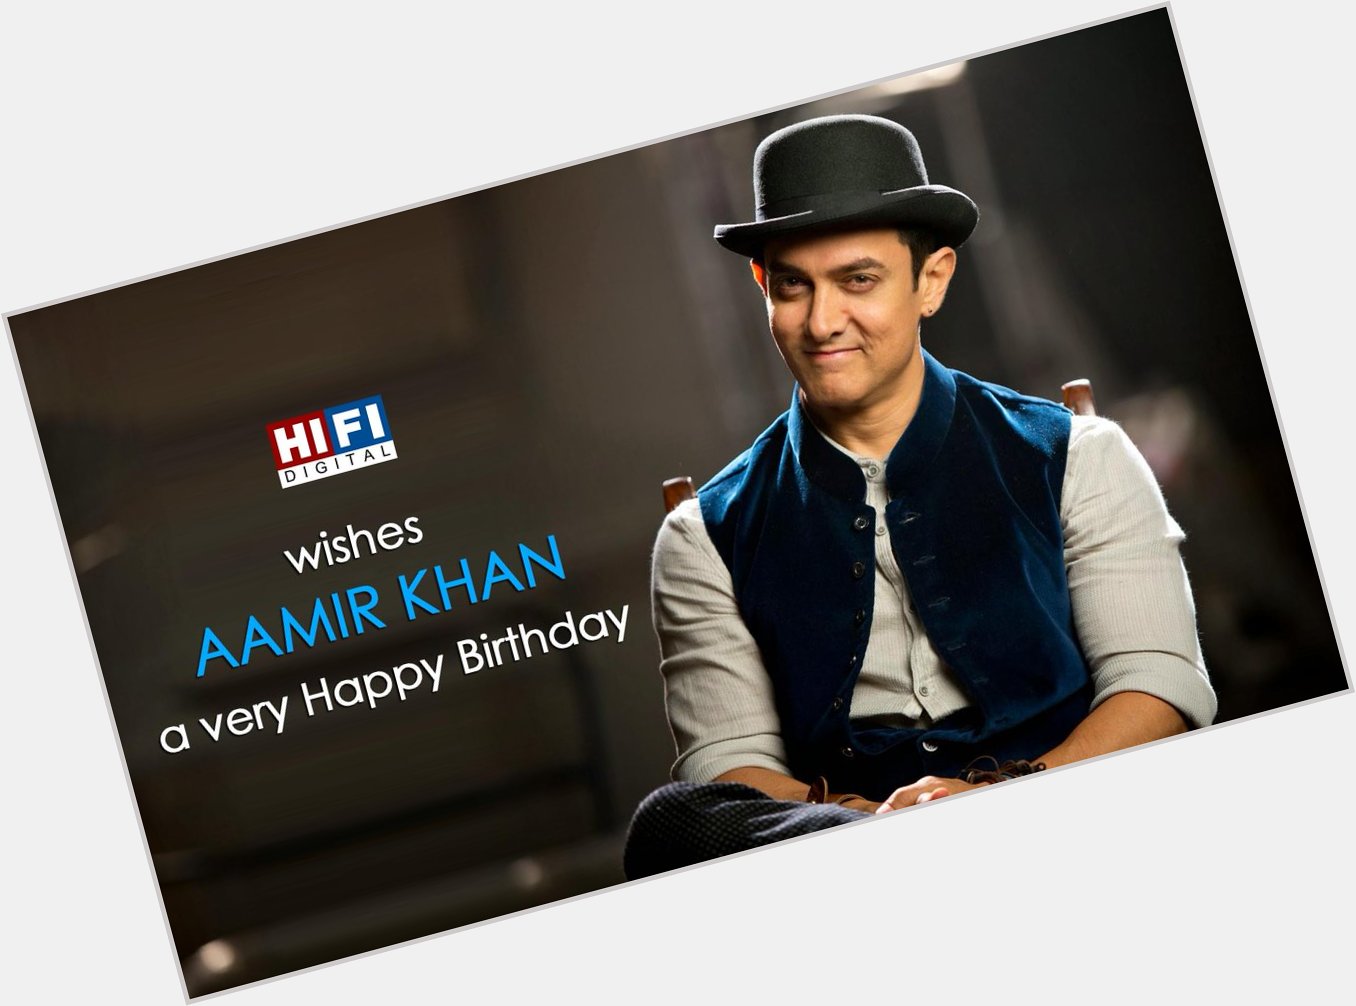 Happy Birthday Aamir Khan. He completes his half century today by turning 50. to wish him :D 